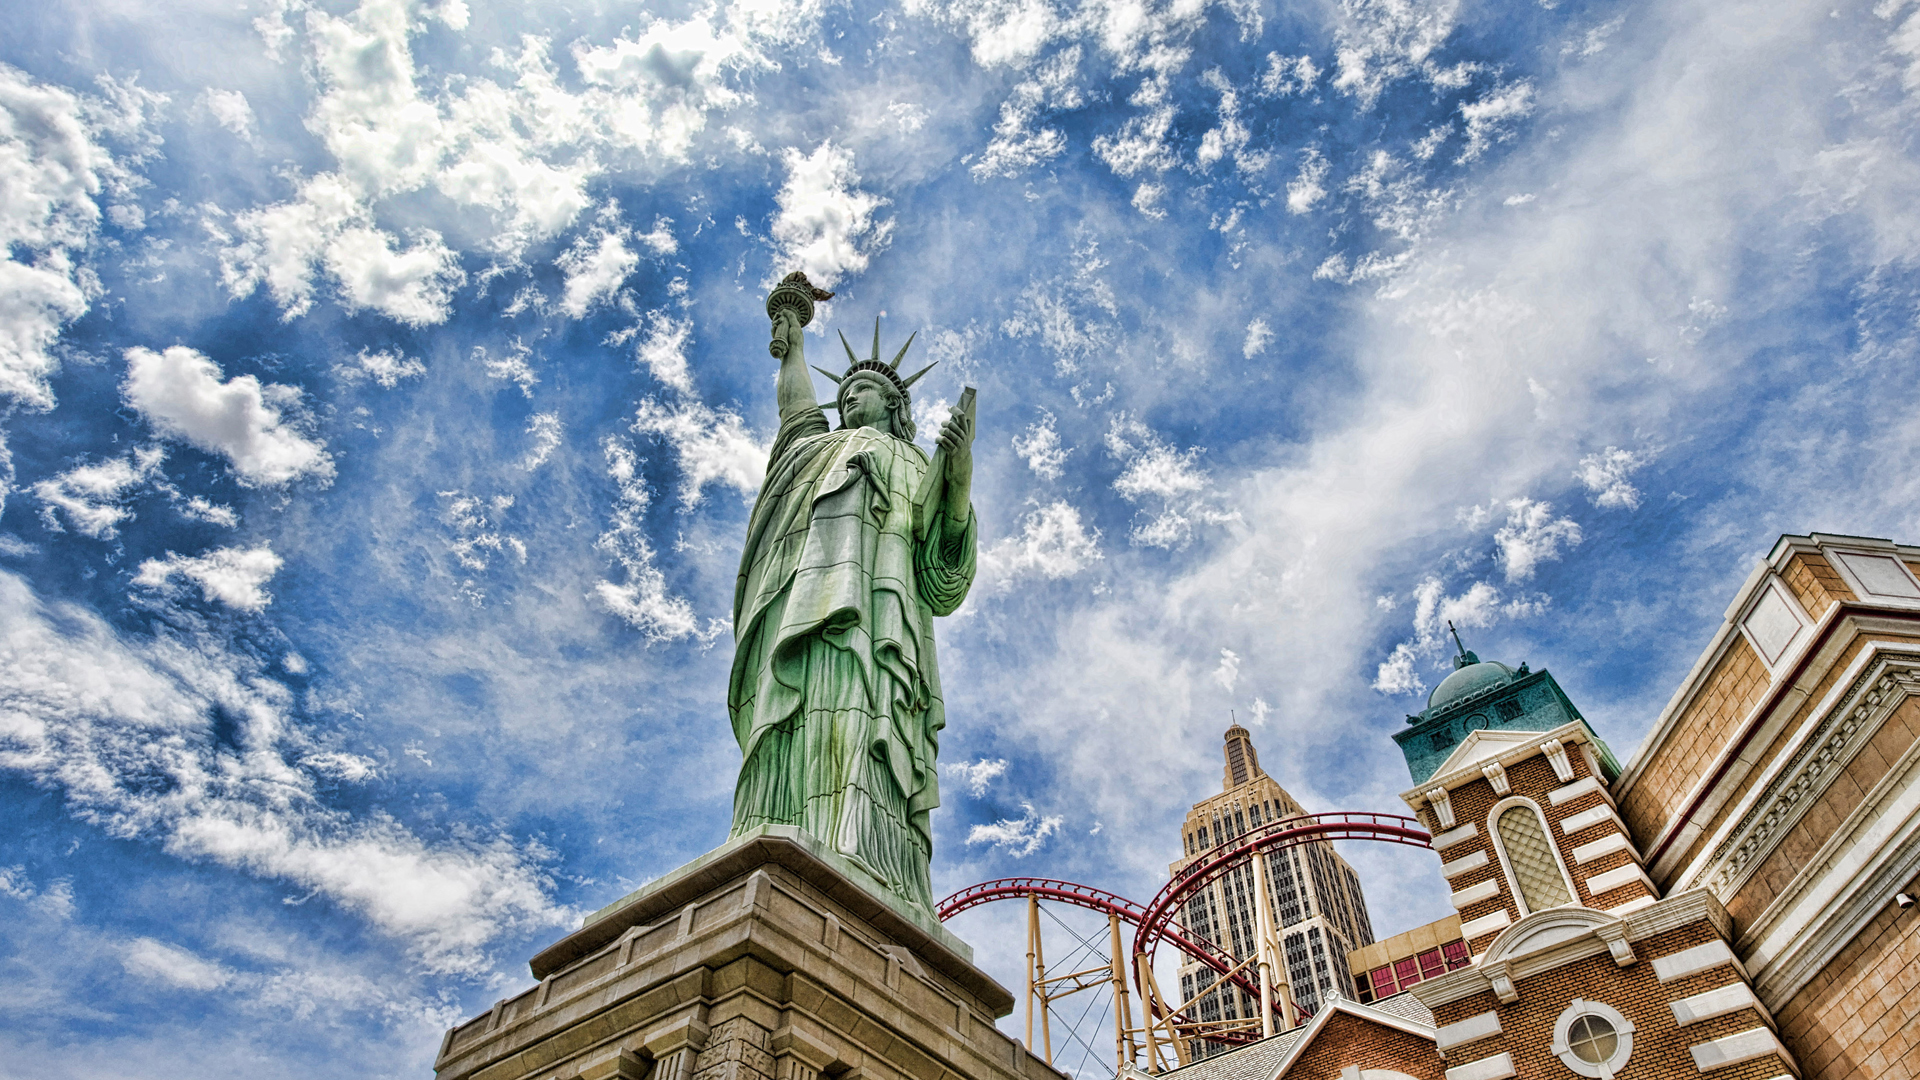 usa, statue of liberty, monuments, blue, architecture